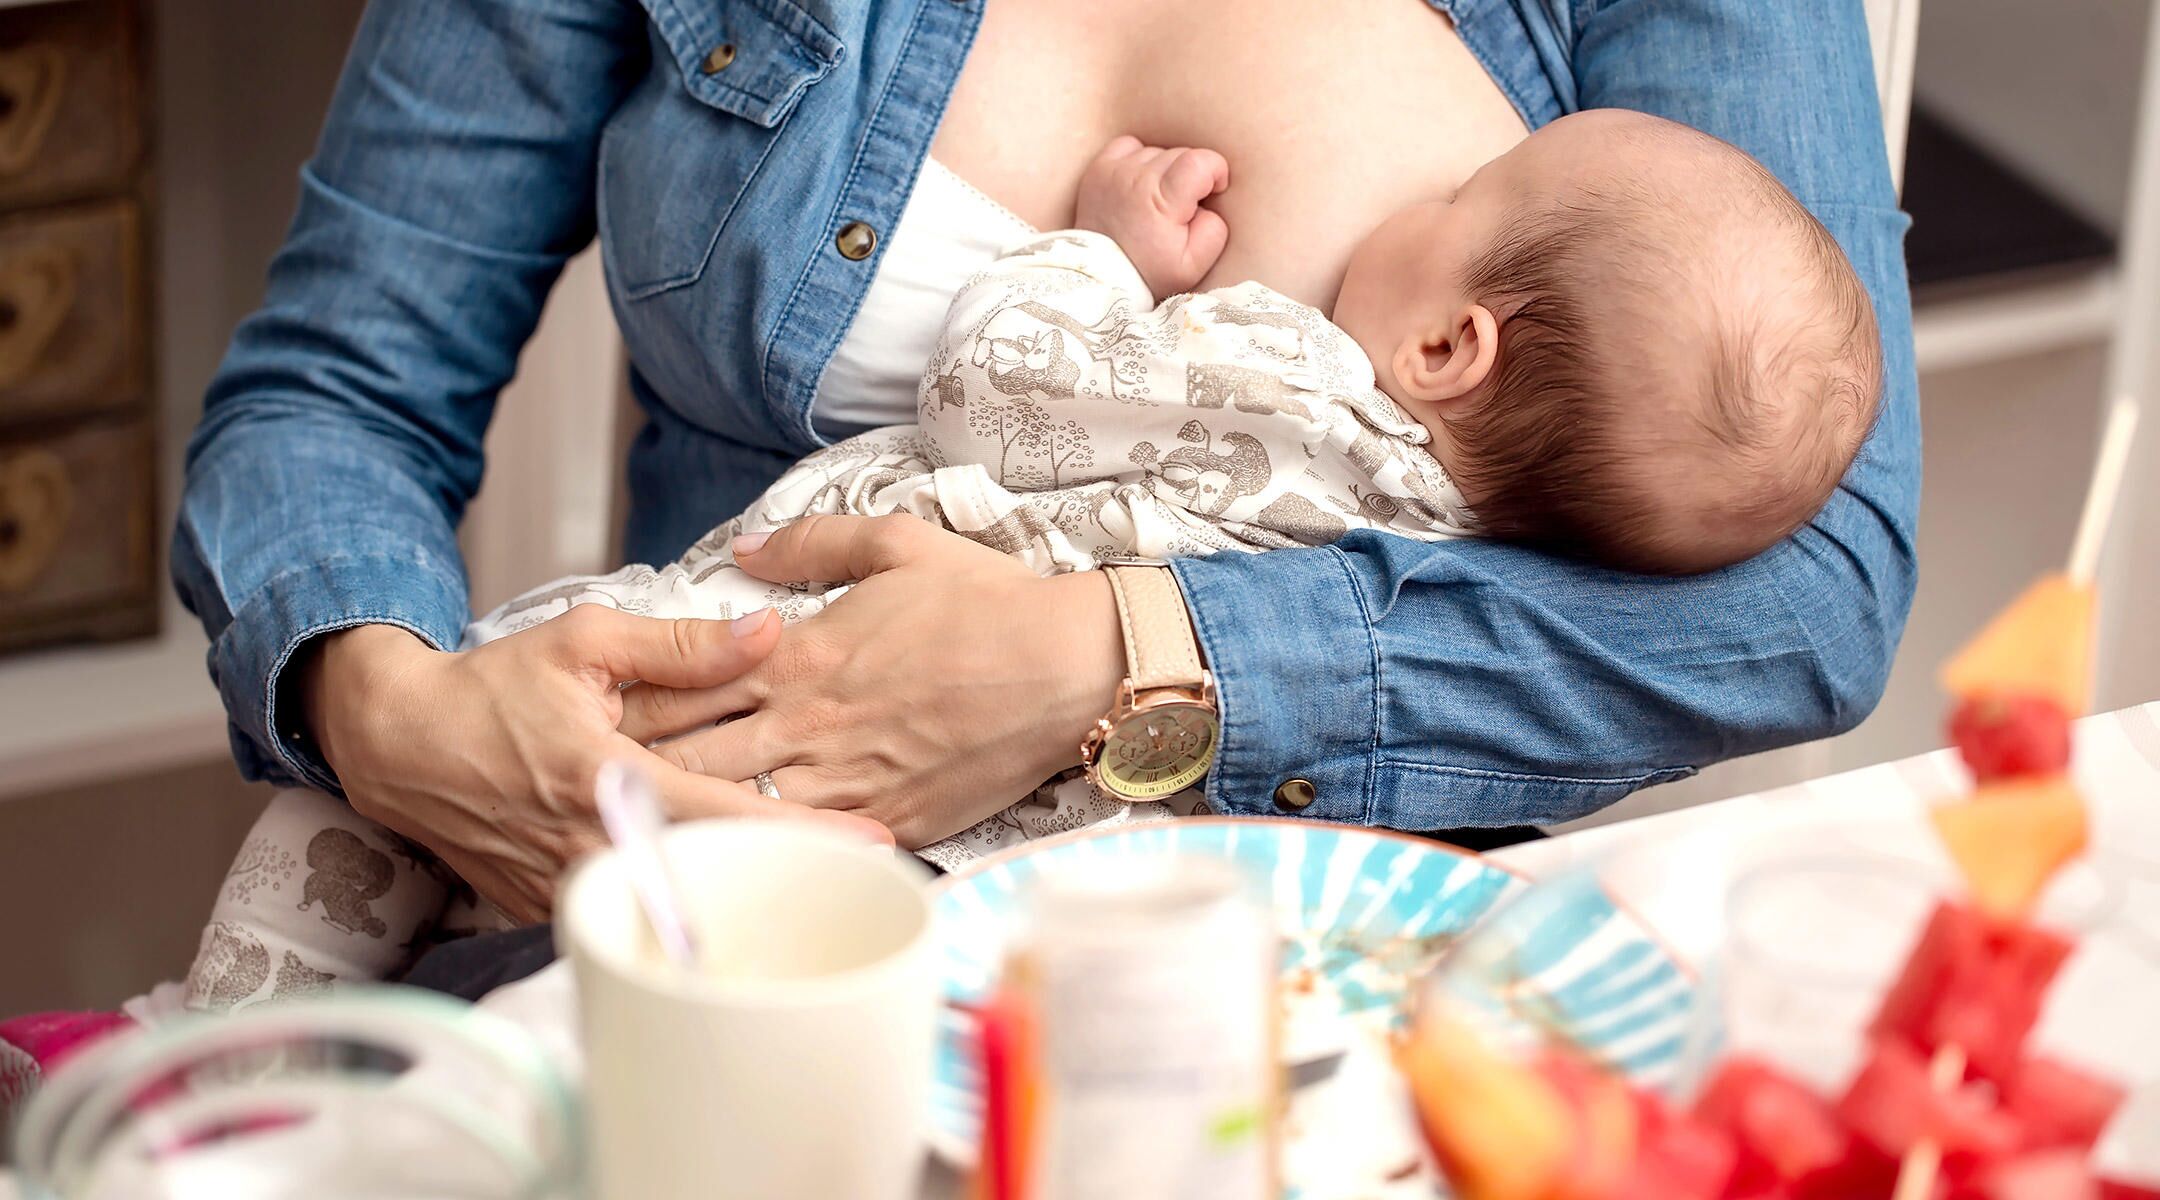 Is Drinking Alcohol While Breastfeeding Safe